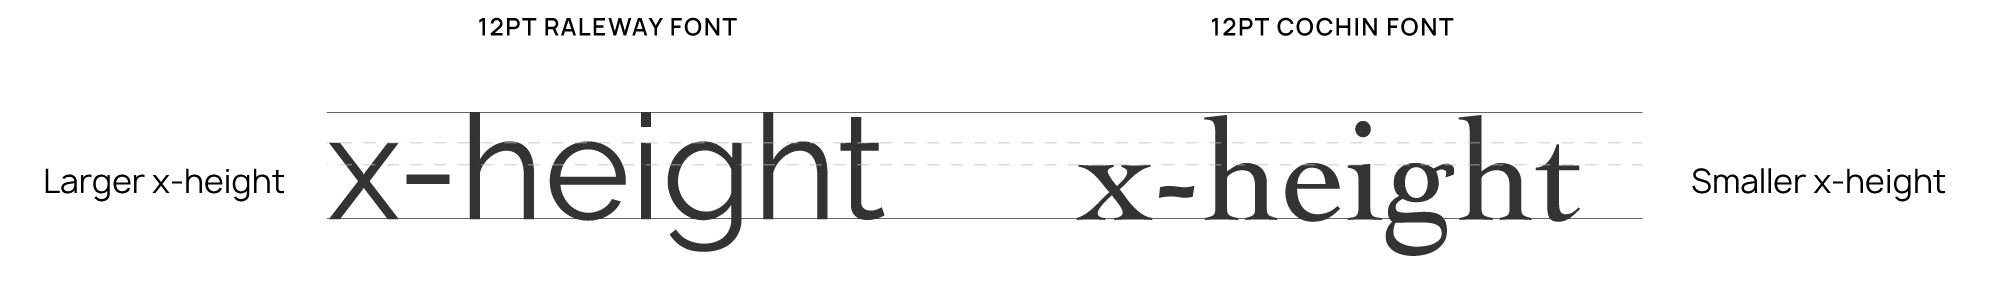 The word "x-height" is written in Raleway font and Cochin font. Though both are 12pt font, Raleway font appears larger because its x-height is taller.